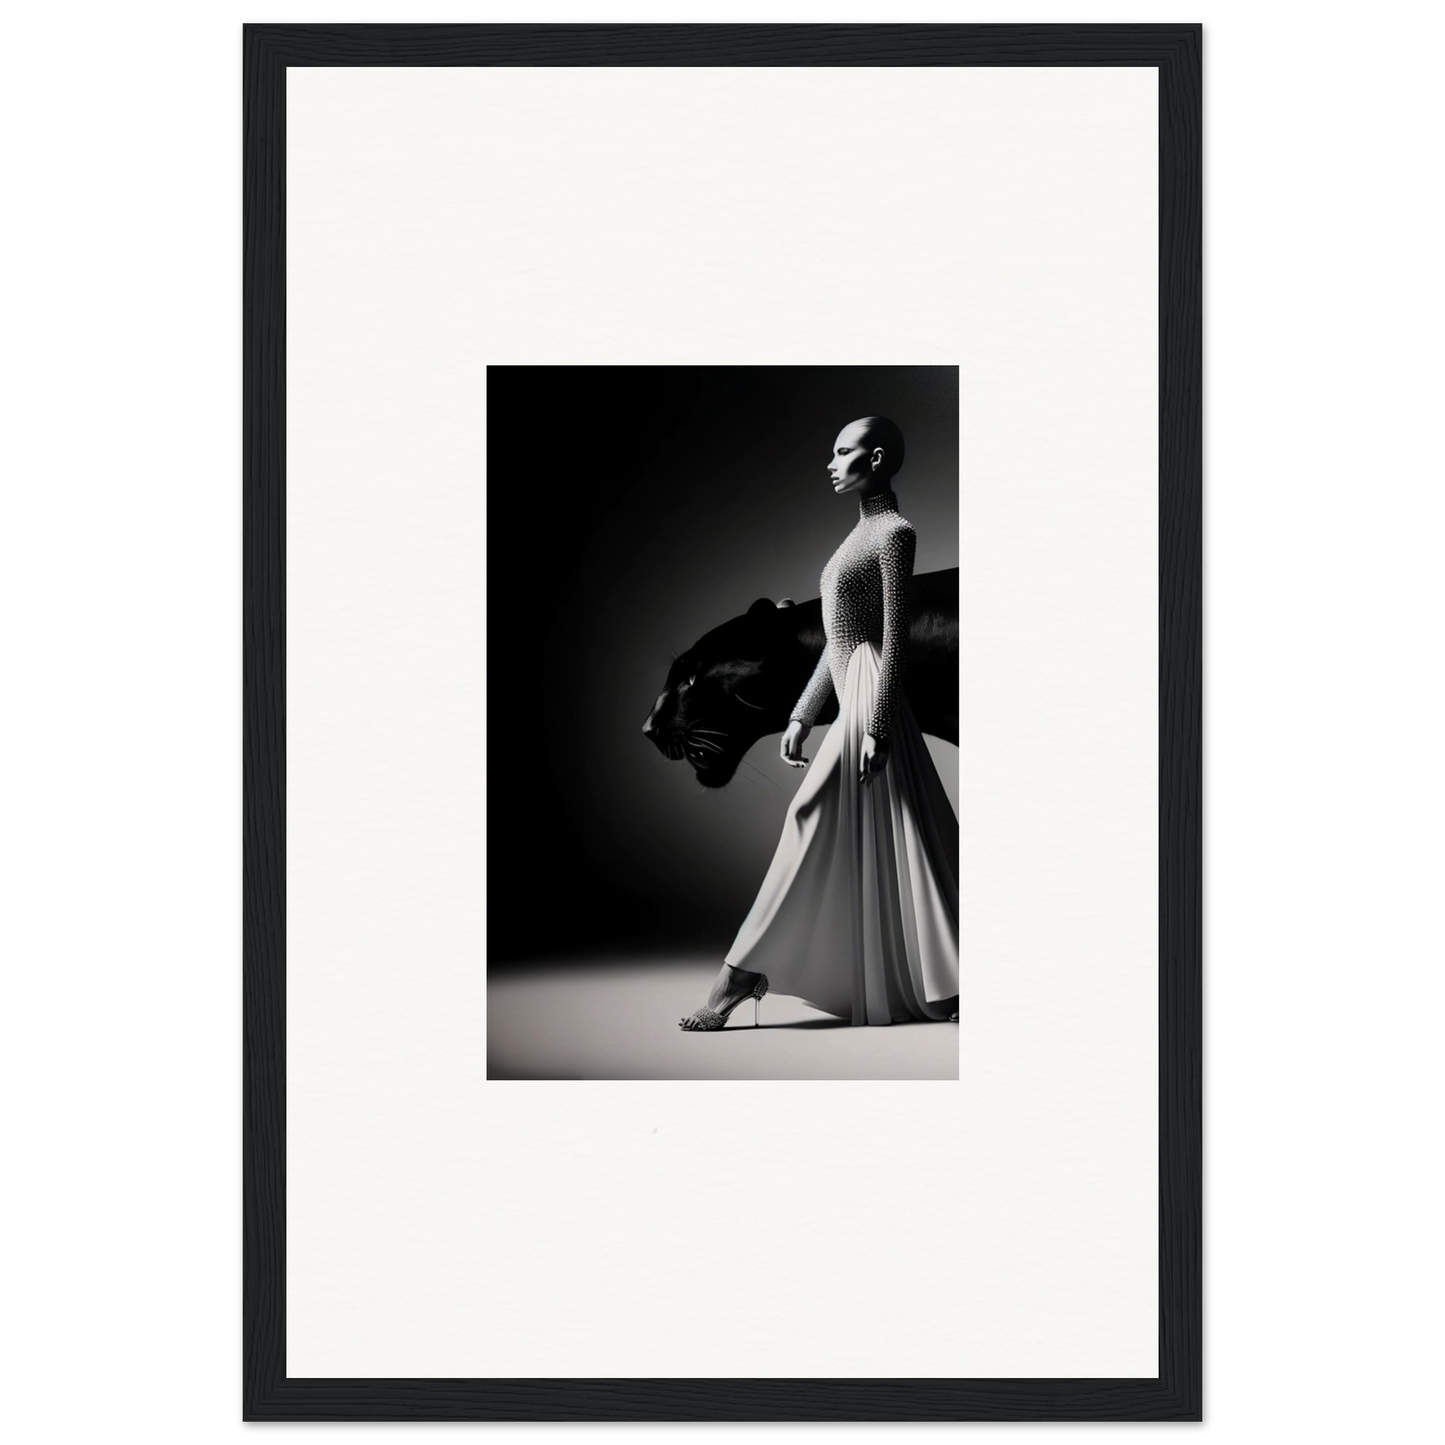 Dancers and time a3 - framed poster - 30x45 cm / 12x18″ /